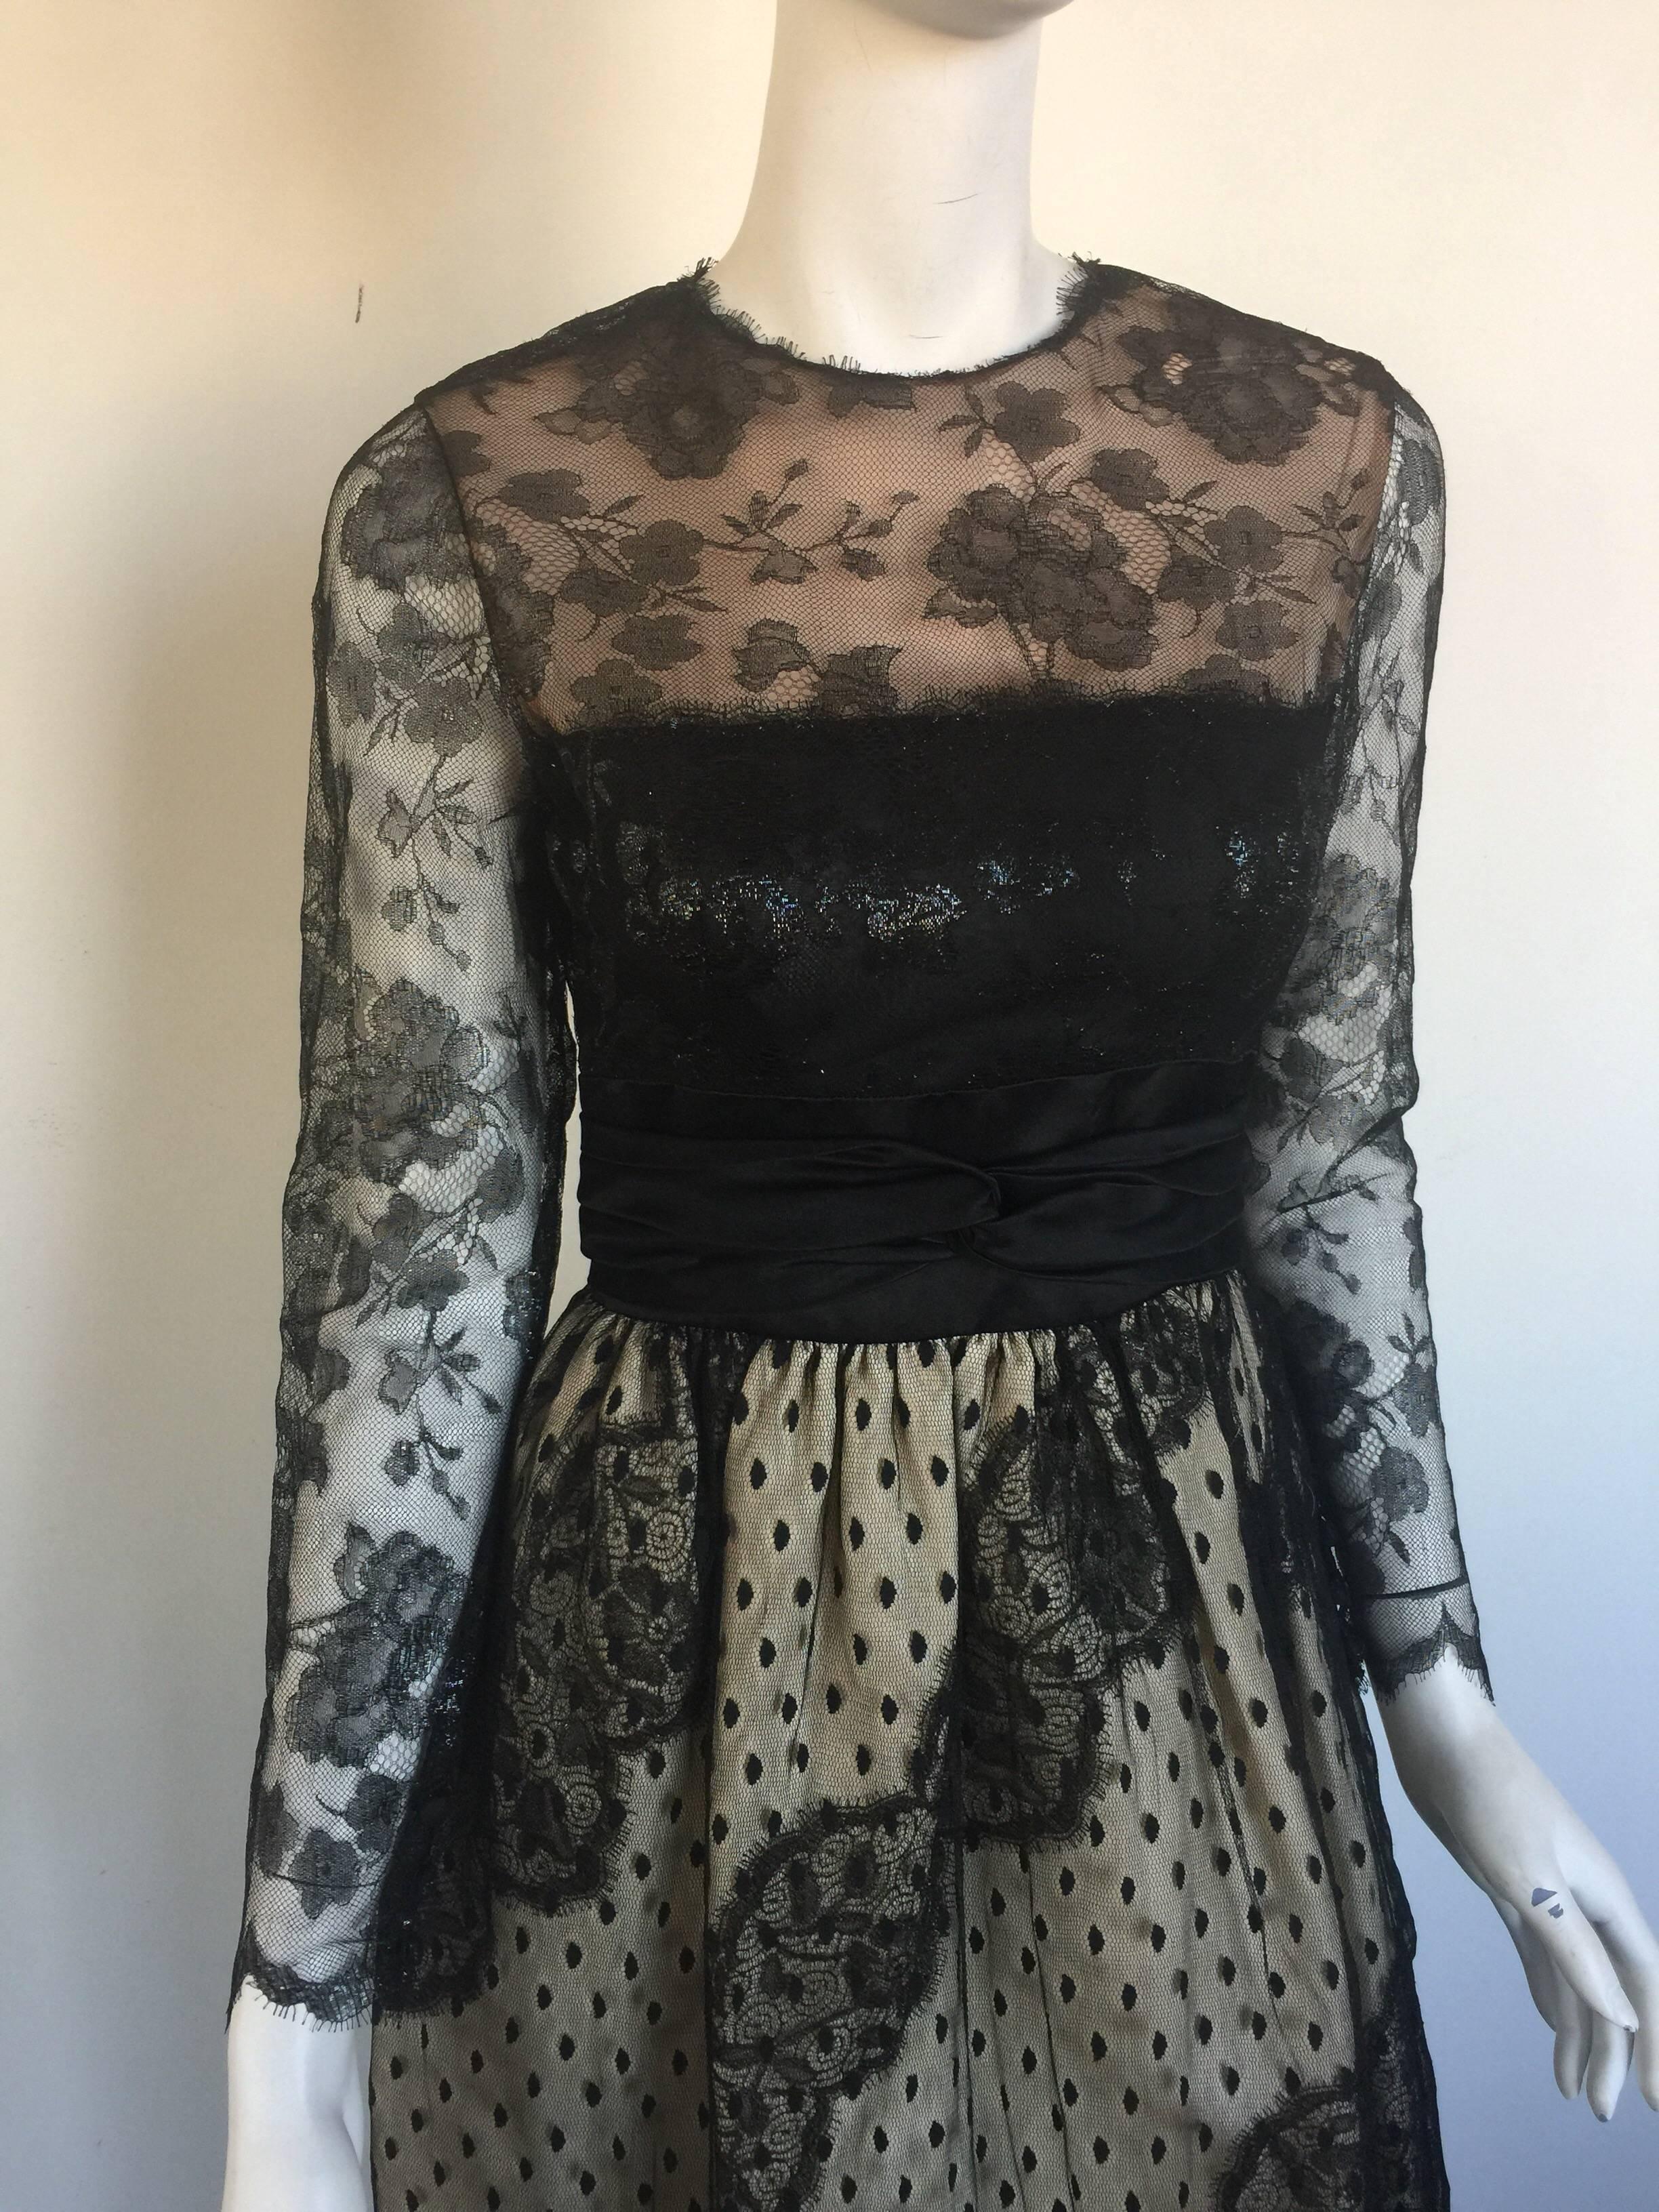 This stunning Bill Blass gown has a nude underlay with place lace and a metallic thread.  It is a classic piece and from the 1970s.  It has a double back zipper and a waist band.  It fits a small and is missing a size label so please check